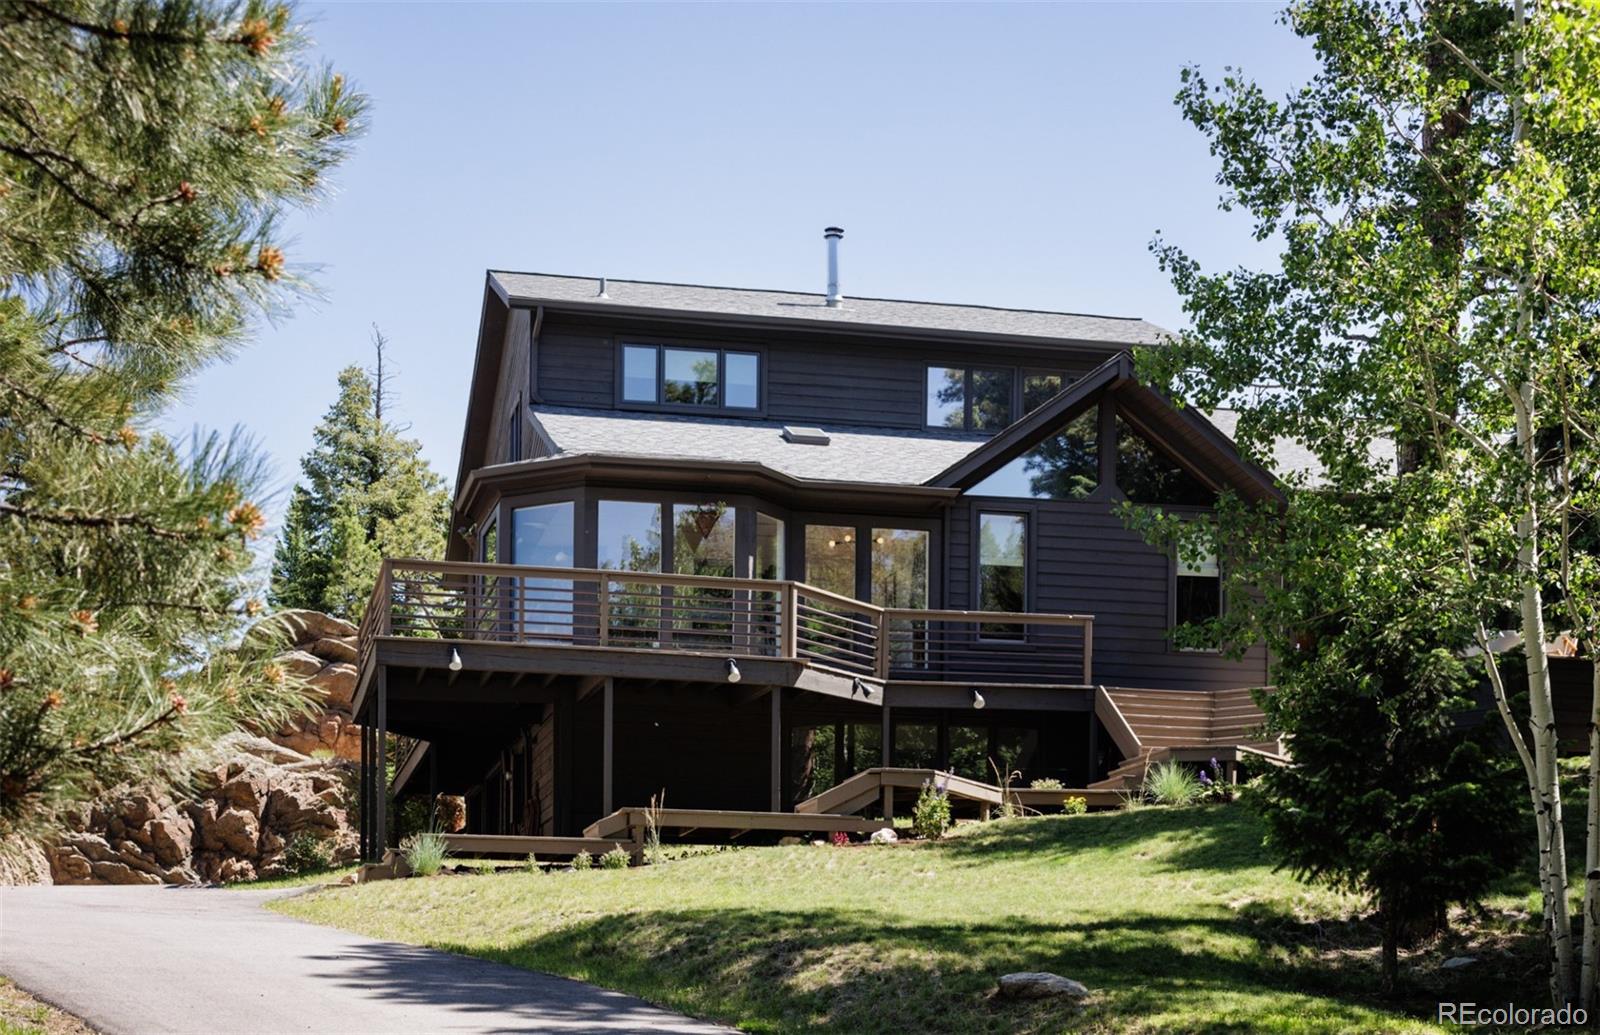 6822  Snowshoe Trail, evergreen MLS: 3699965 Beds: 5 Baths: 3 Price: $1,590,000